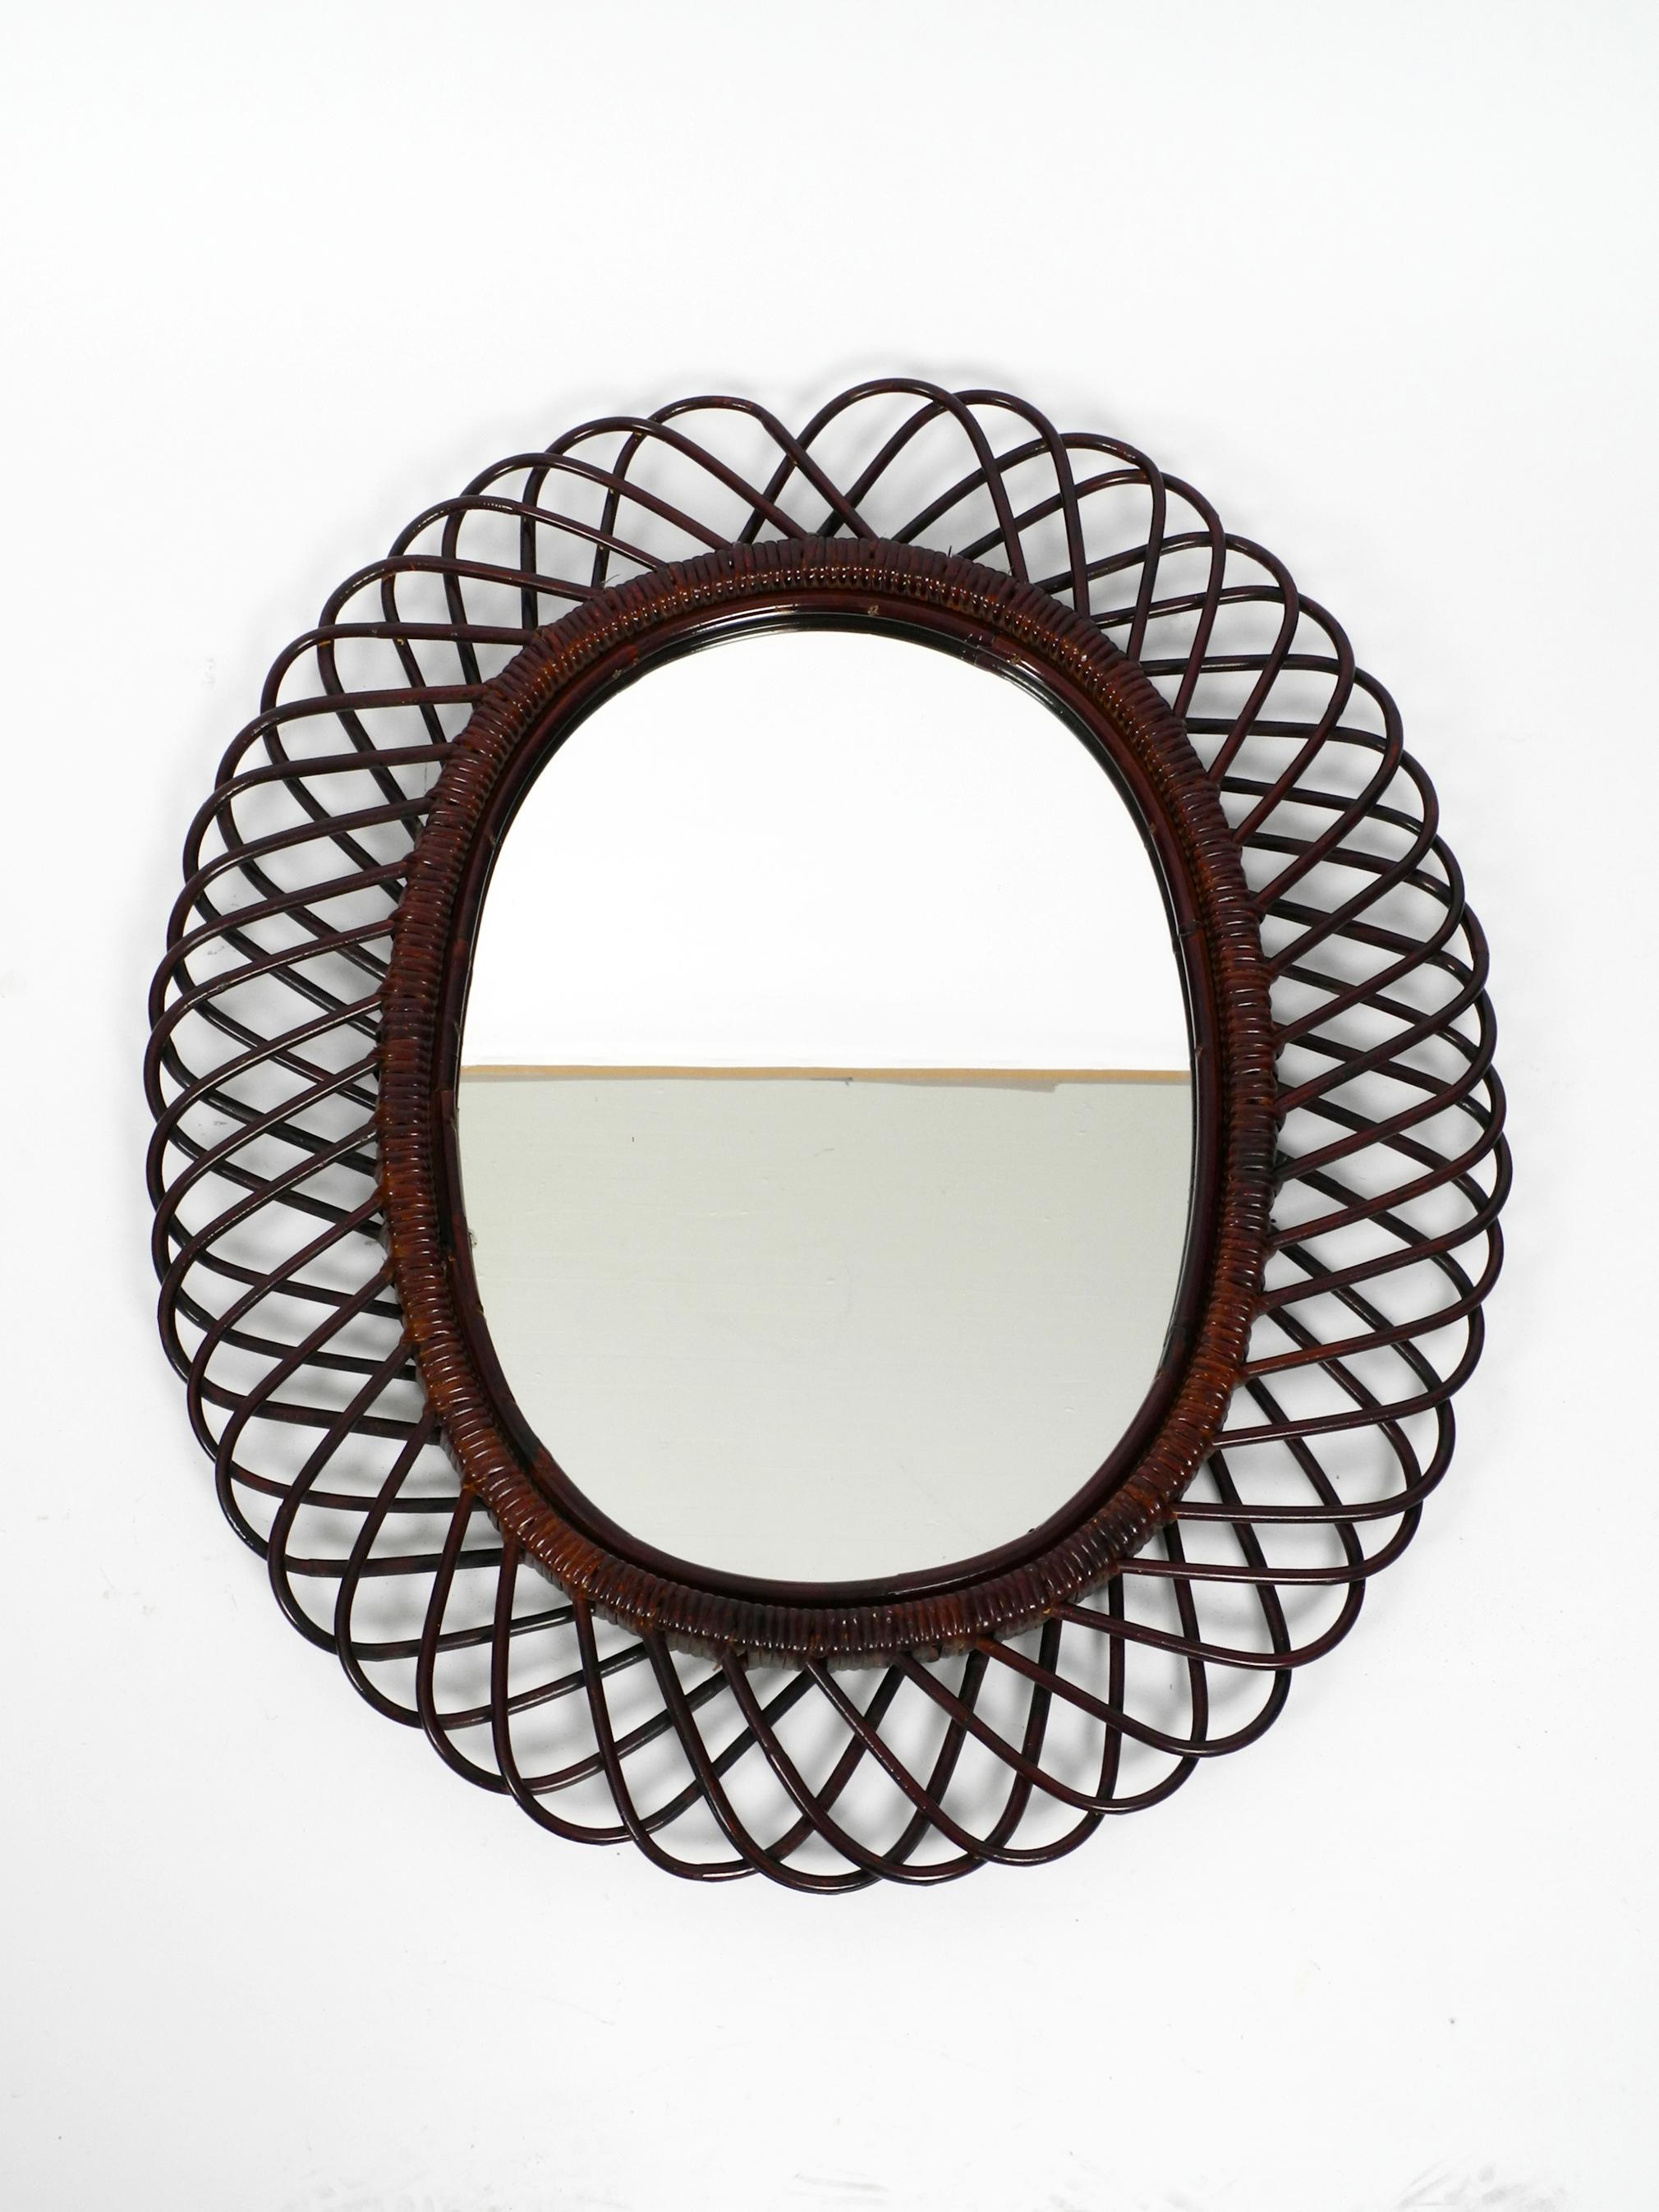 1960s Italian Large Oval Mahogany Colored Bamboo Wall Mirror in Loop Design 9